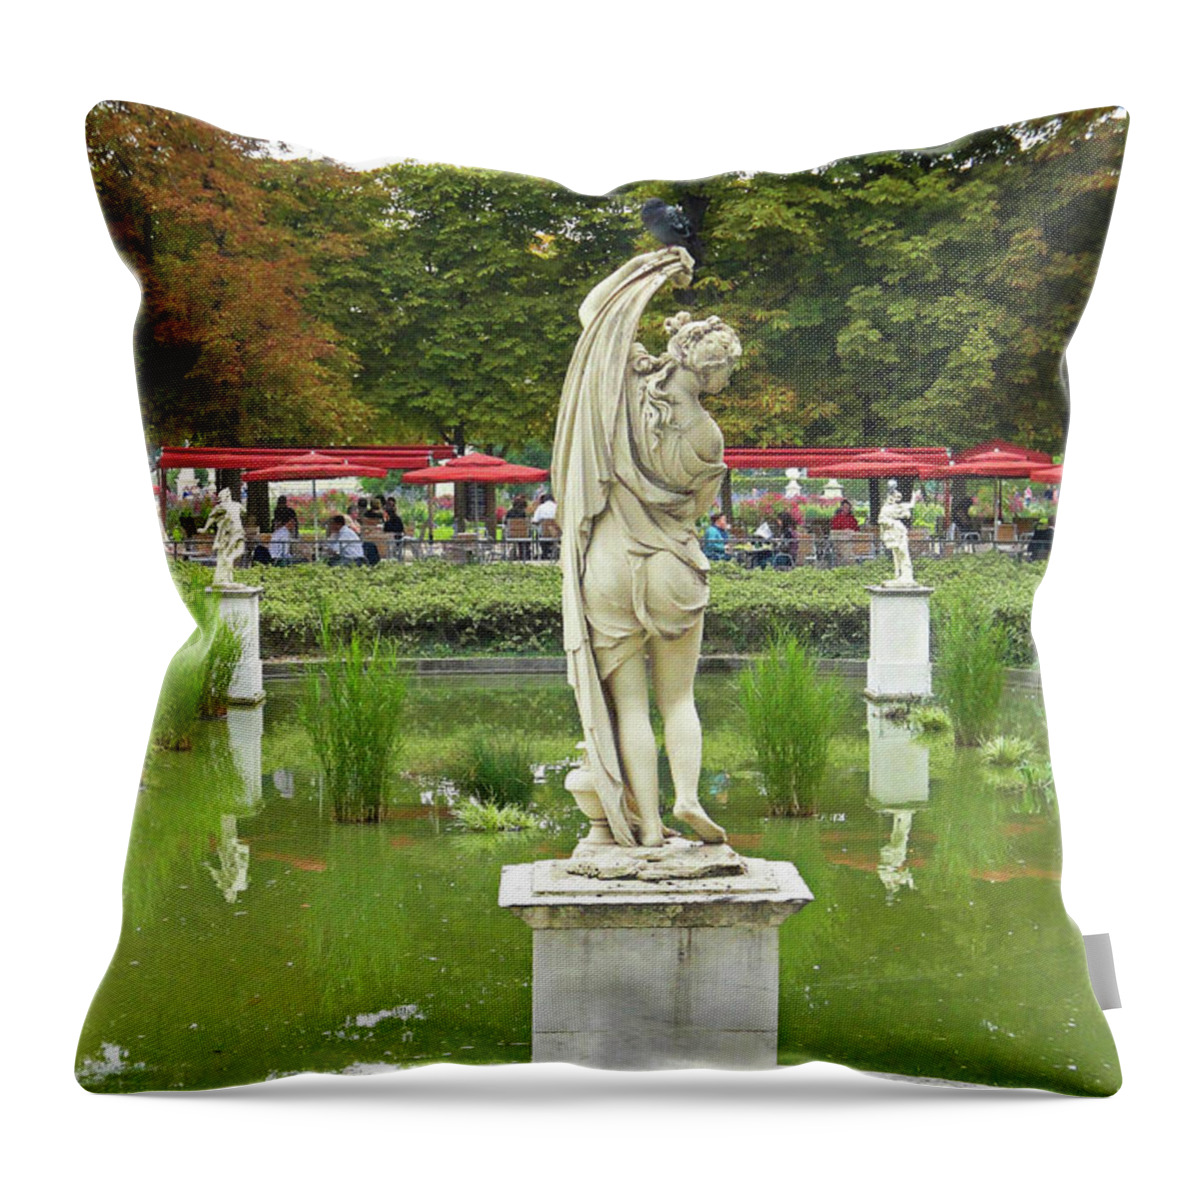 Tuileries Garden Throw Pillow featuring the photograph Tuileries Trollop by Robert Meyers-Lussier